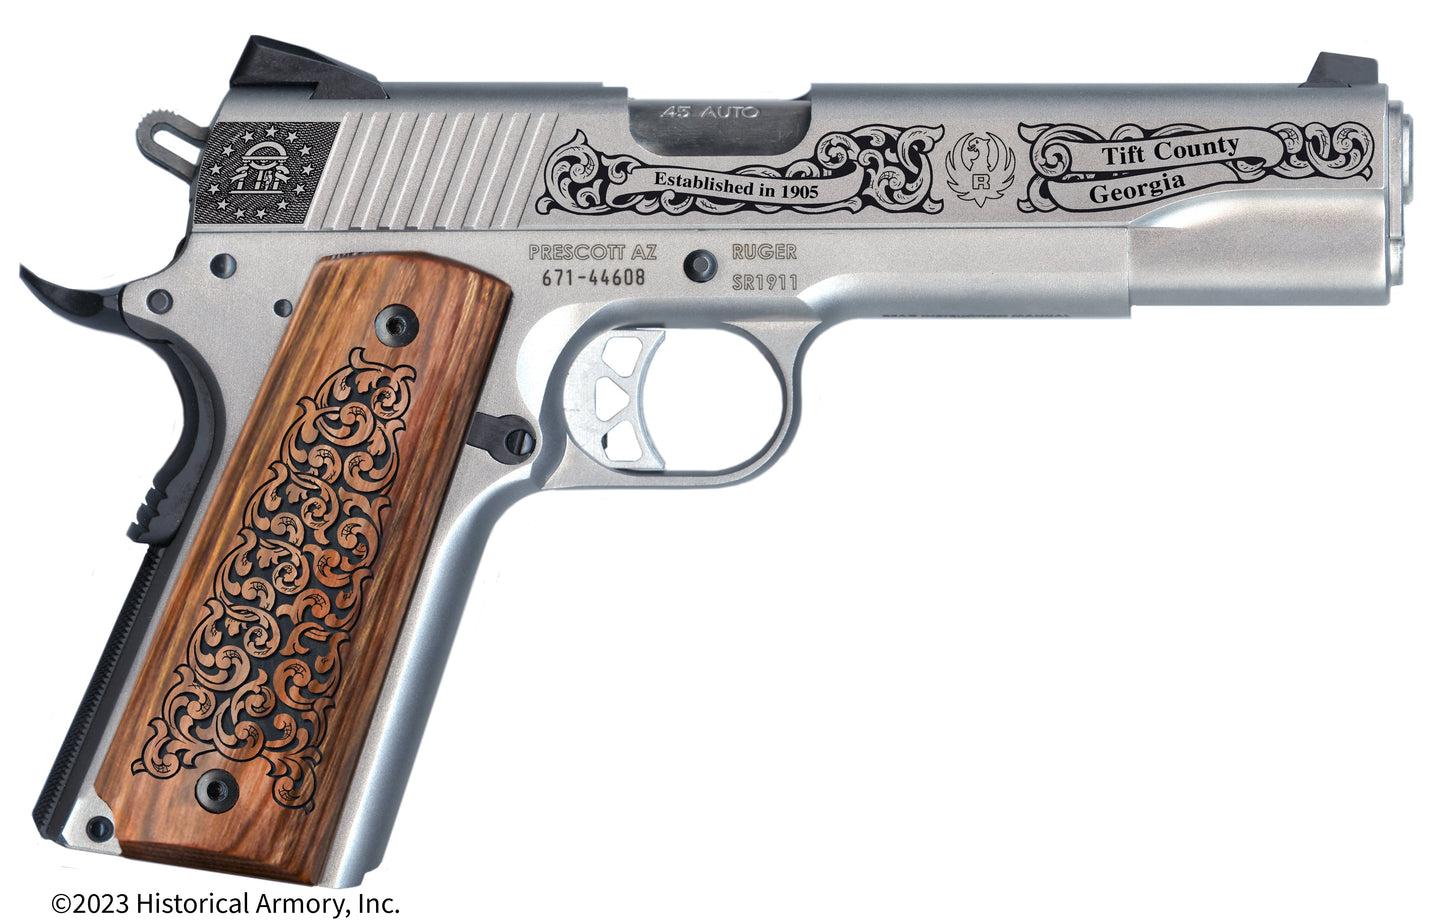 Tift County Georgia Engraved .45 Auto Ruger 1911